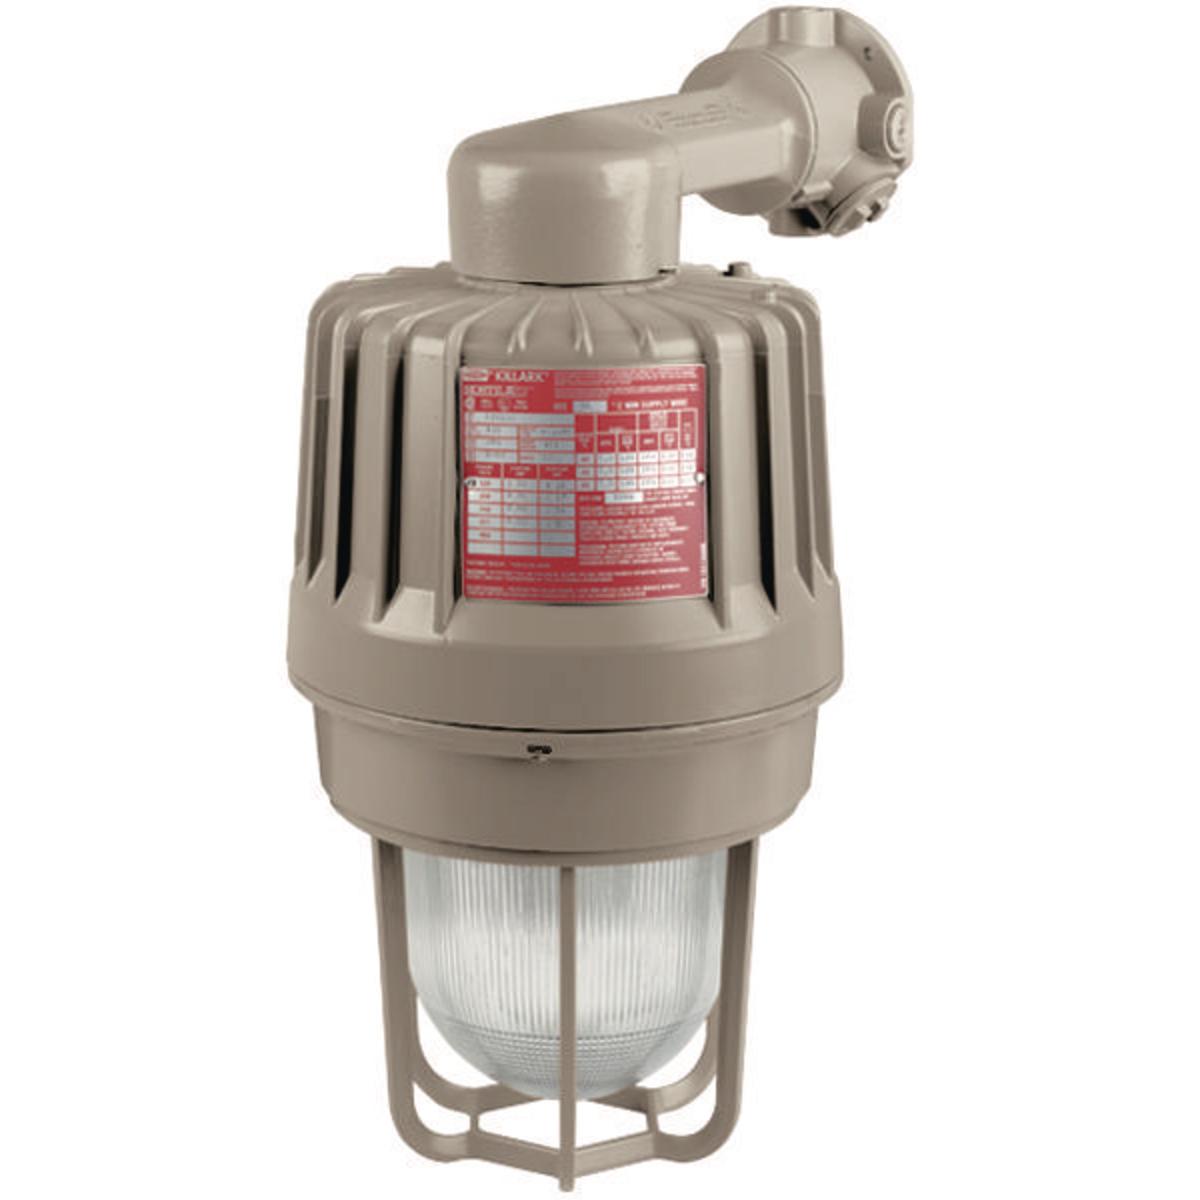 Hubbell EZS405B3 HID 400W 480V High Pressure Sodium 1" Wall Mount  ; Three light sources – High Pressure Sodium (50-400W), Metal Halide (70-400W) and Pulse Start Metal Halide (175-400W) ; Mounting choice –Pendant, ceiling, 25˚ stanchion or 90˚ wall mount, all with “wirele